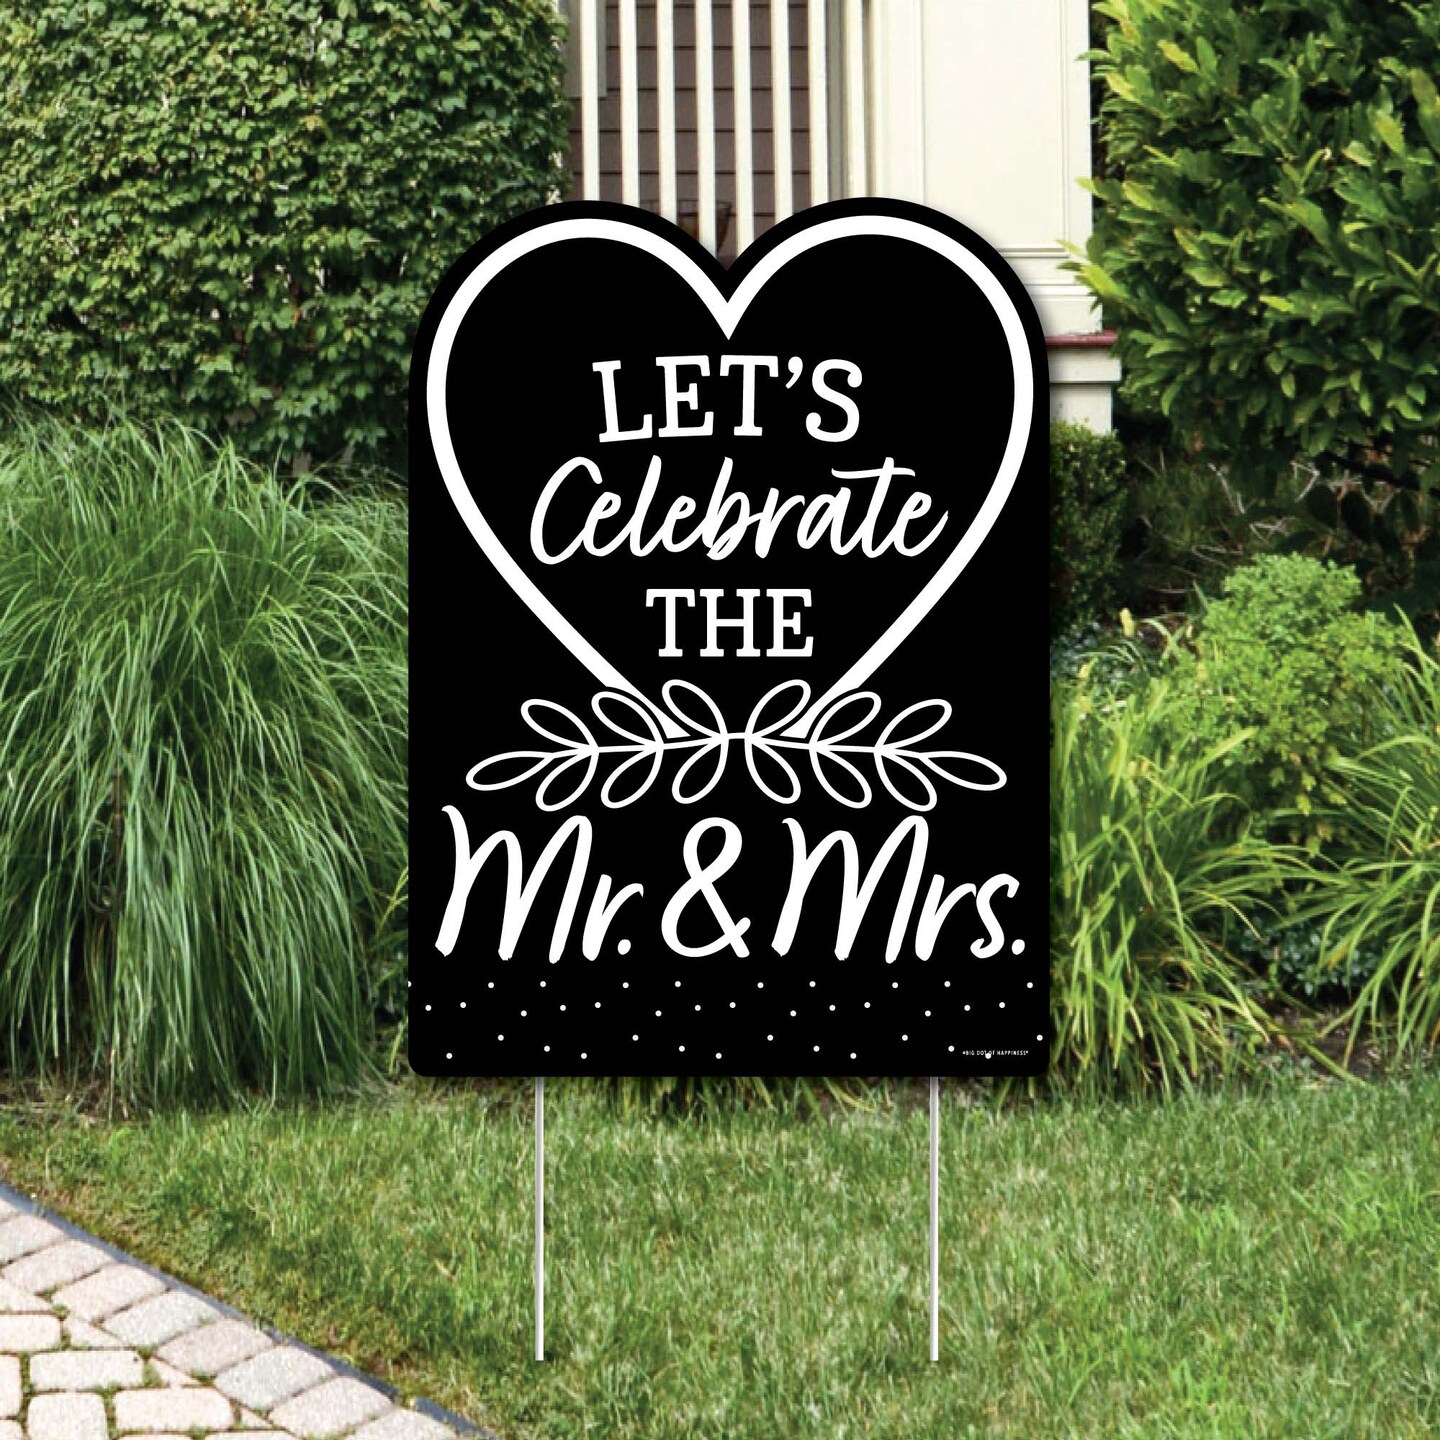 Big Dot of Happiness Mr. and Mrs. - Party Decorations - Black and White Wedding or Bridal Shower Welcome Yard Sign